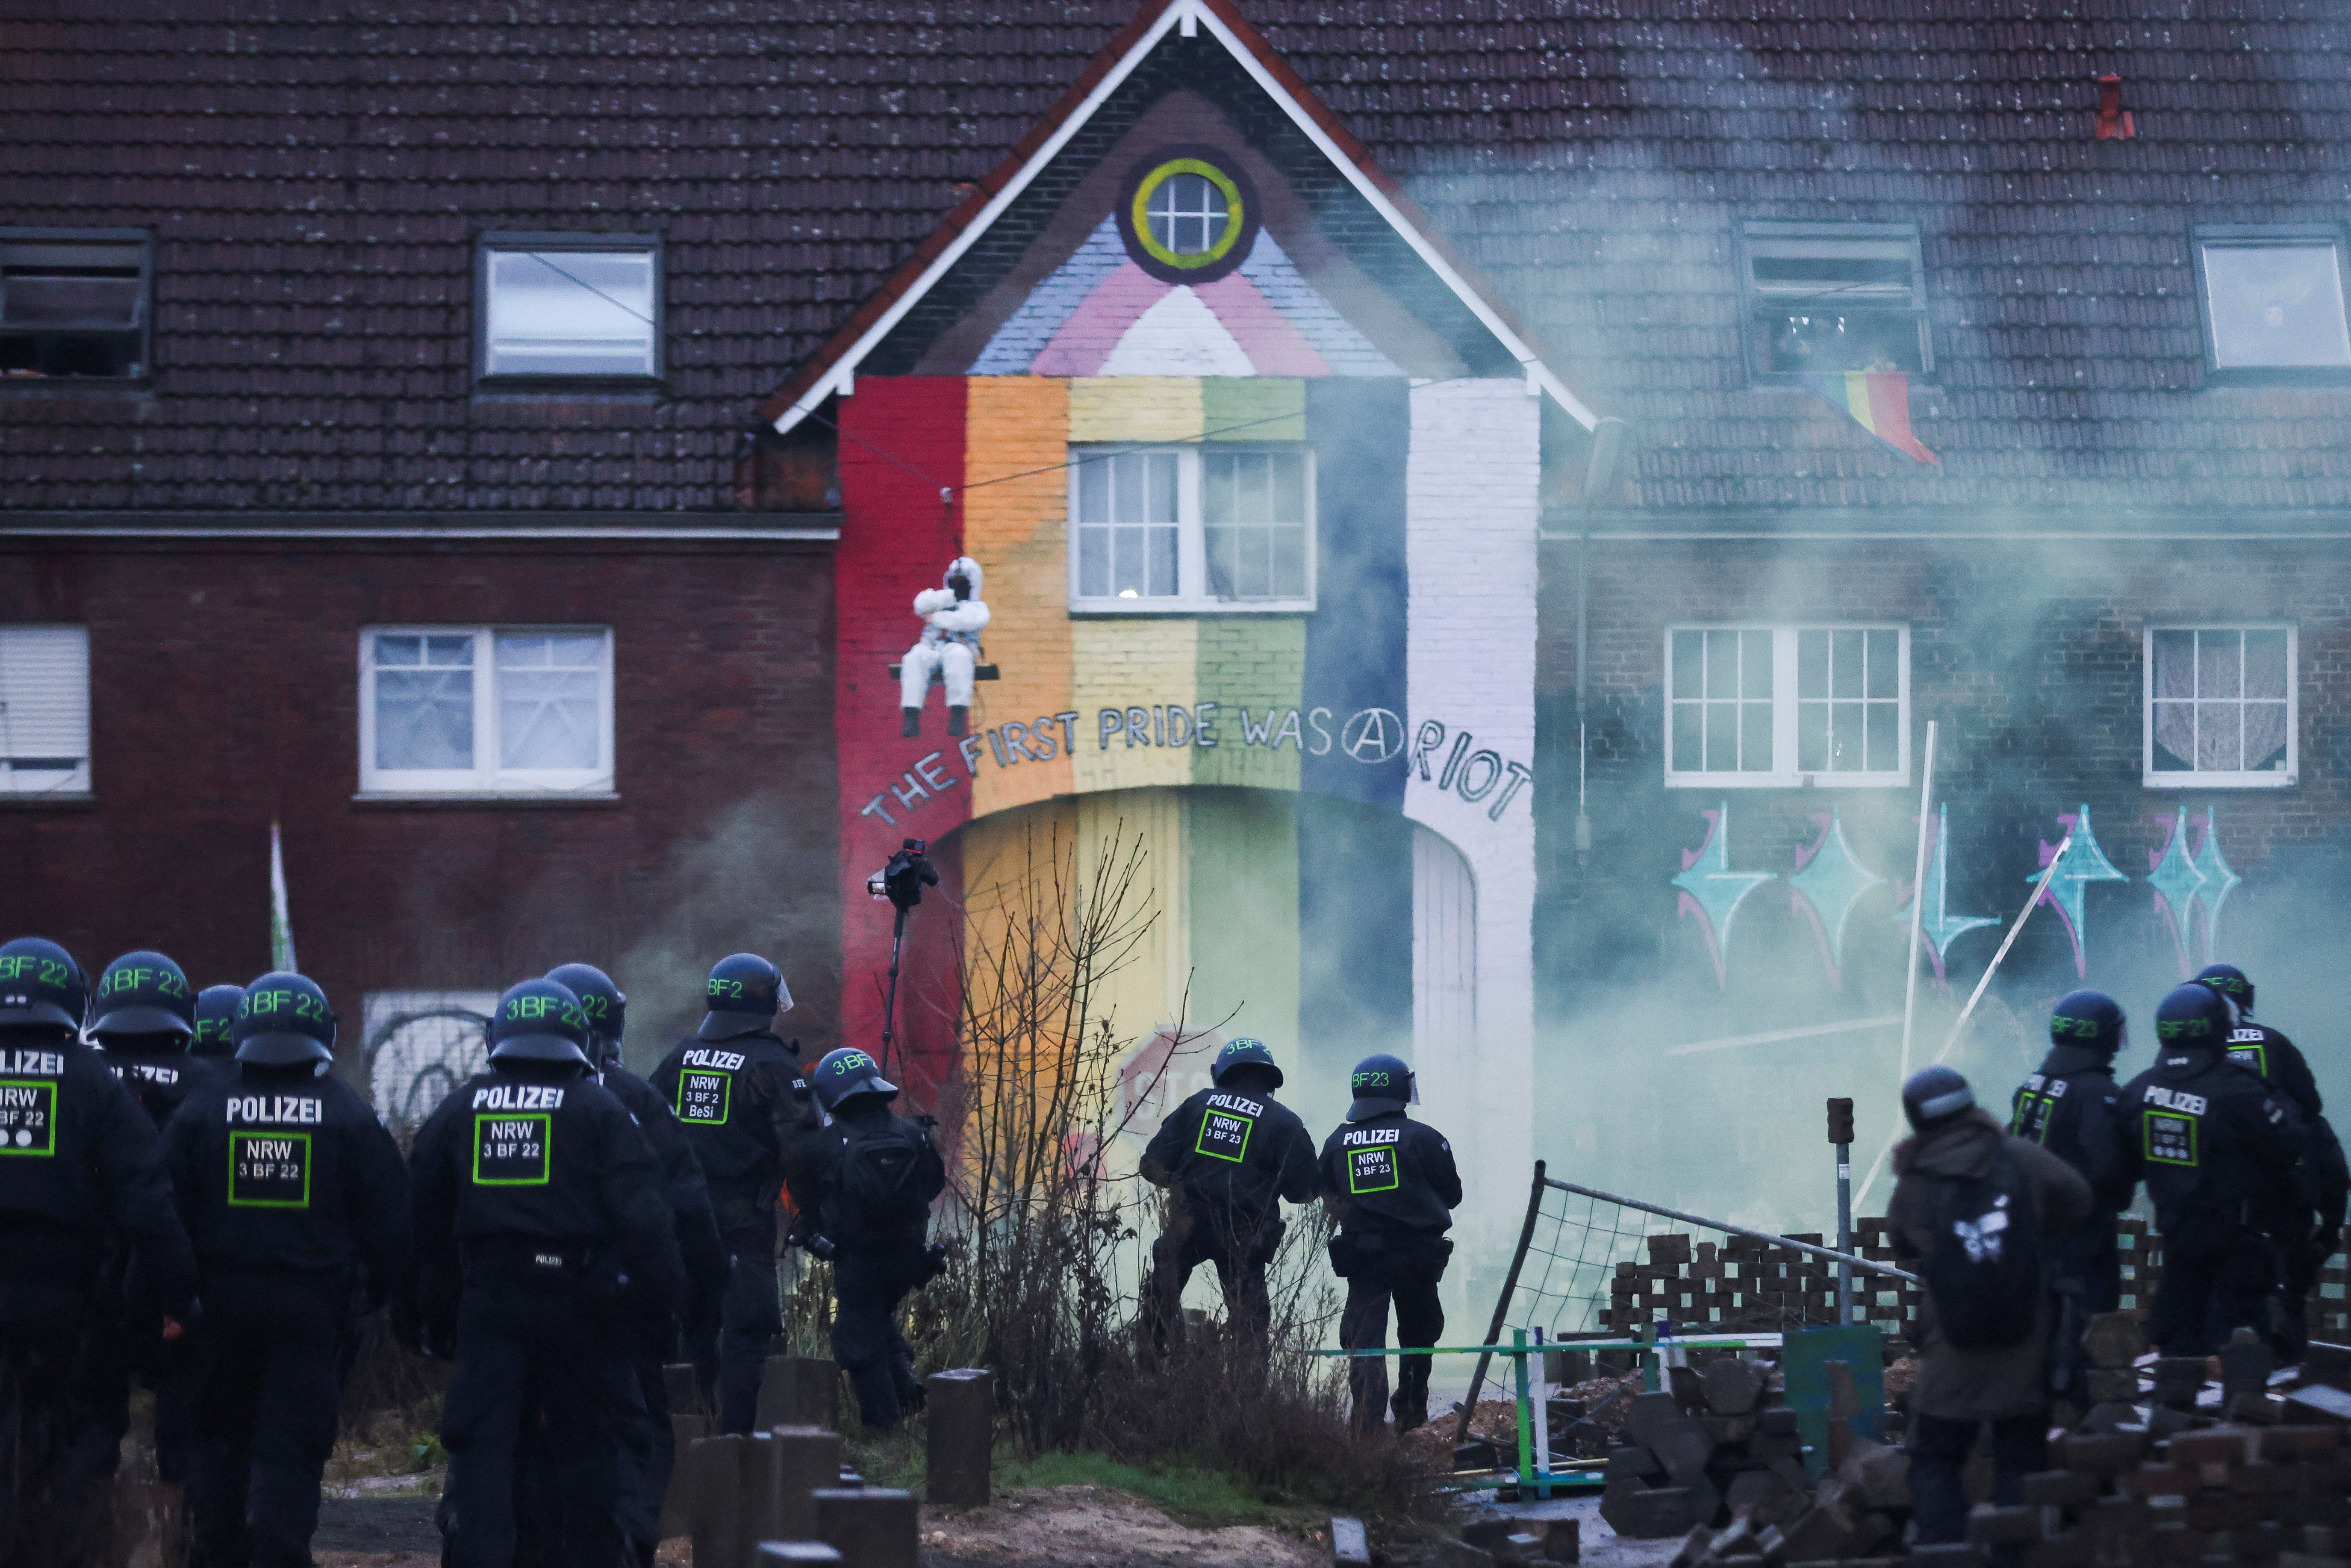 German police clash with activists during a confrontation over the expansion of a coal mine in Luetzerath